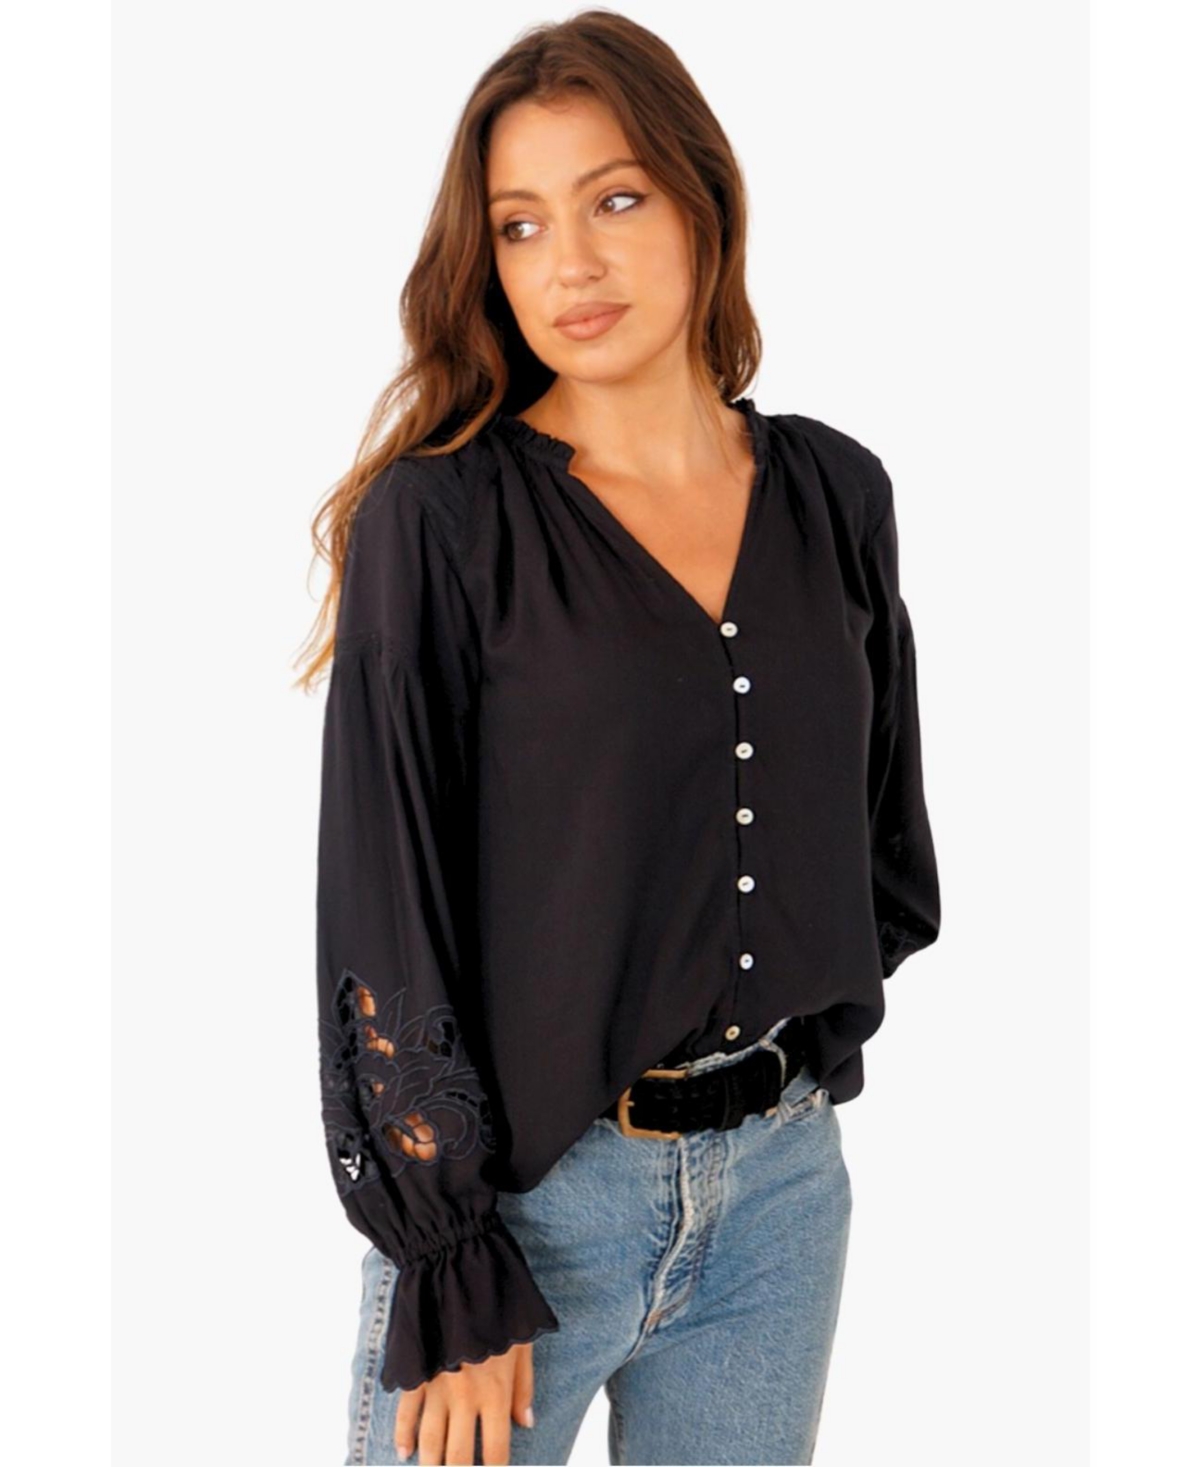 Women's Long Sleeve Embroidered Stevie Blouse - Off white